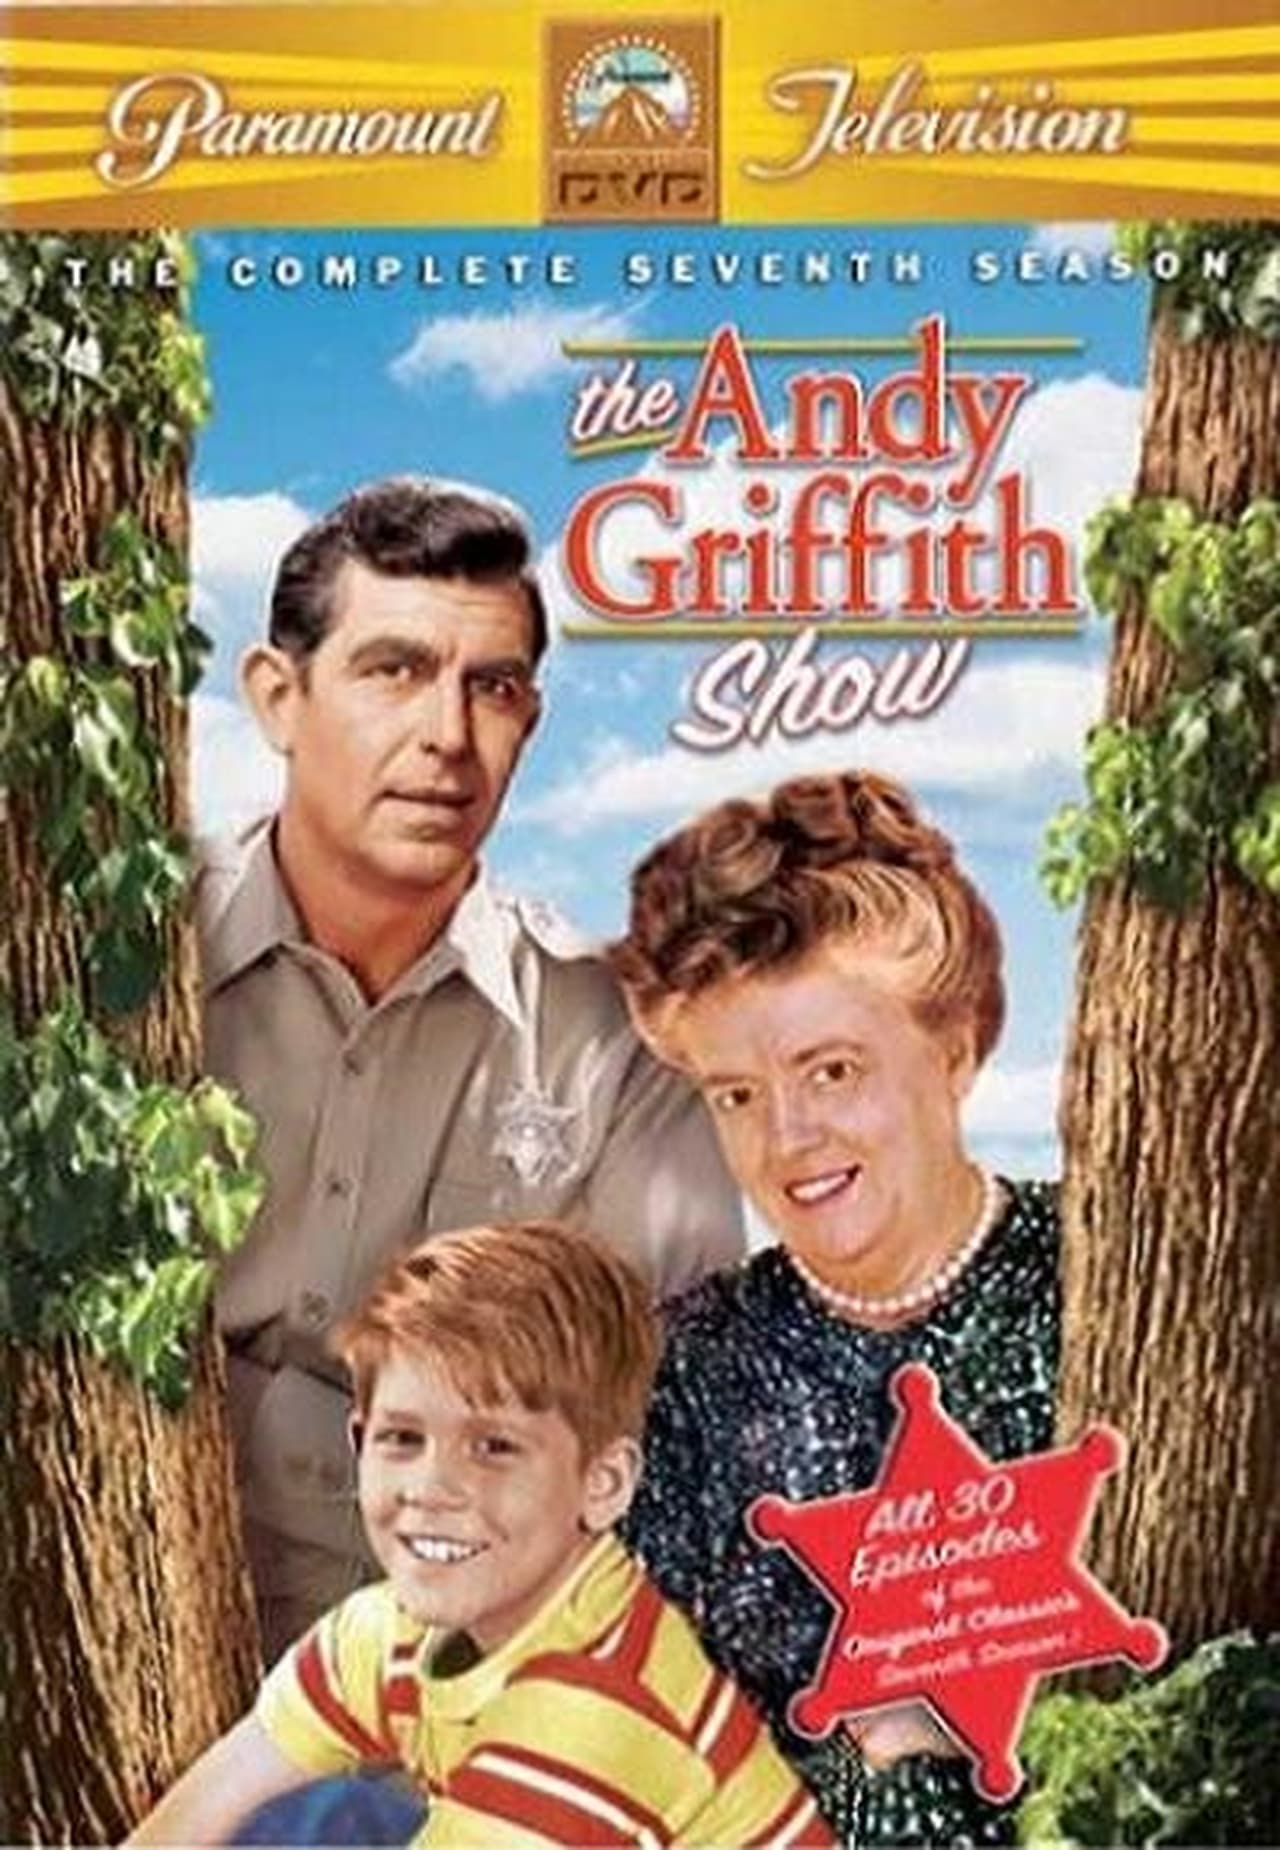 The Andy Griffith Show Season 7